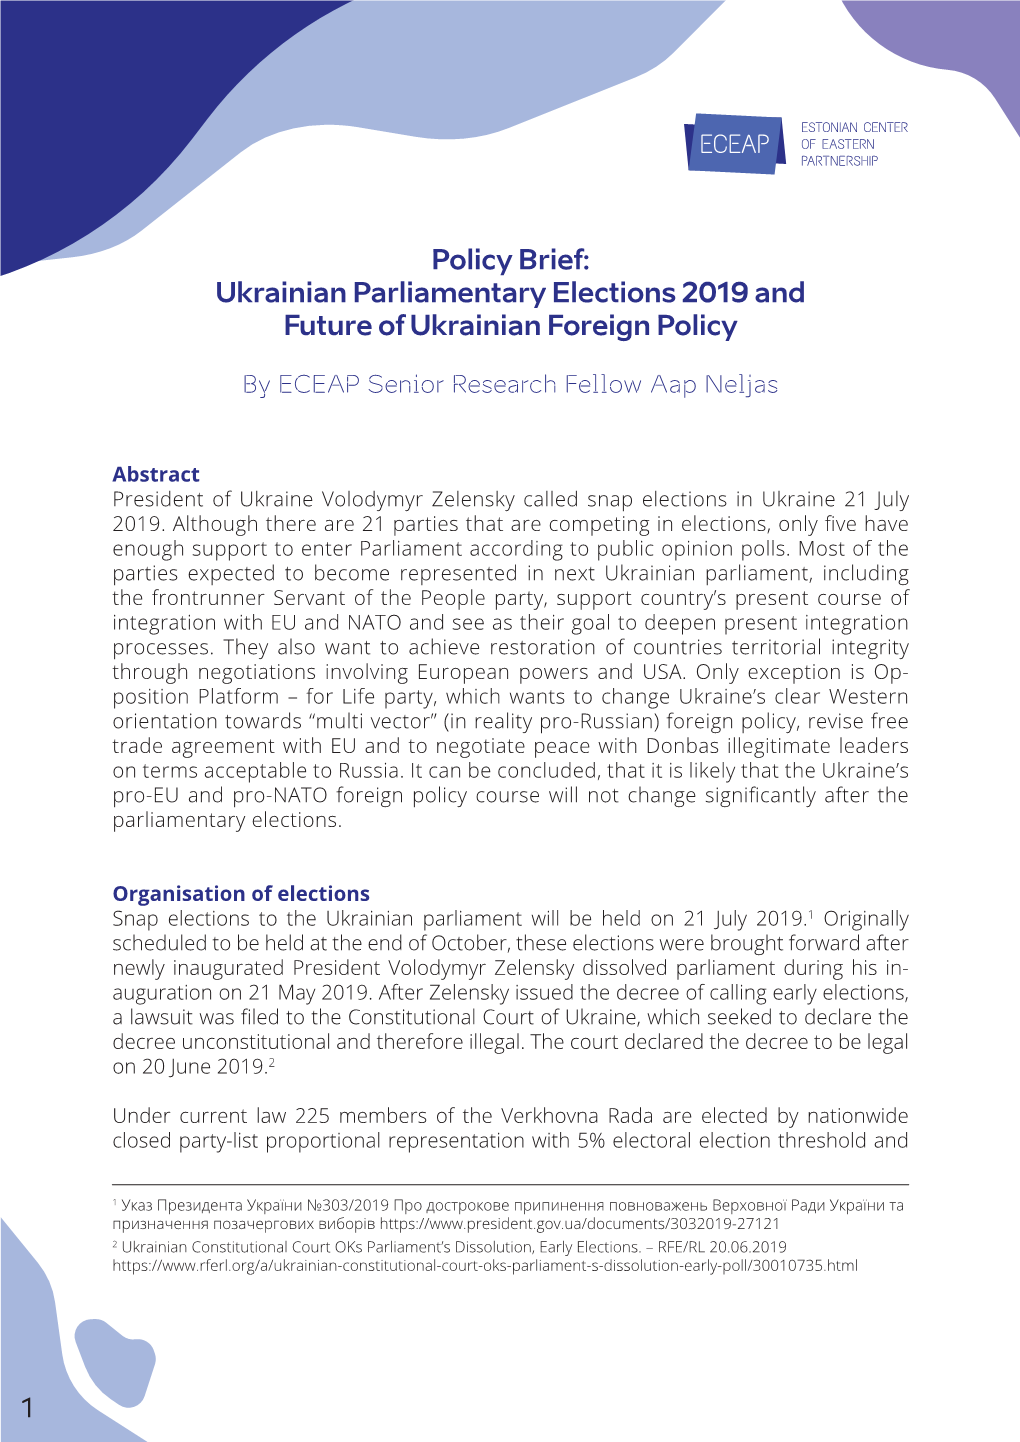 Policy Brief: Ukrainian Parliamentary Elections 2019 and Future of Ukrainian Foreign Policy